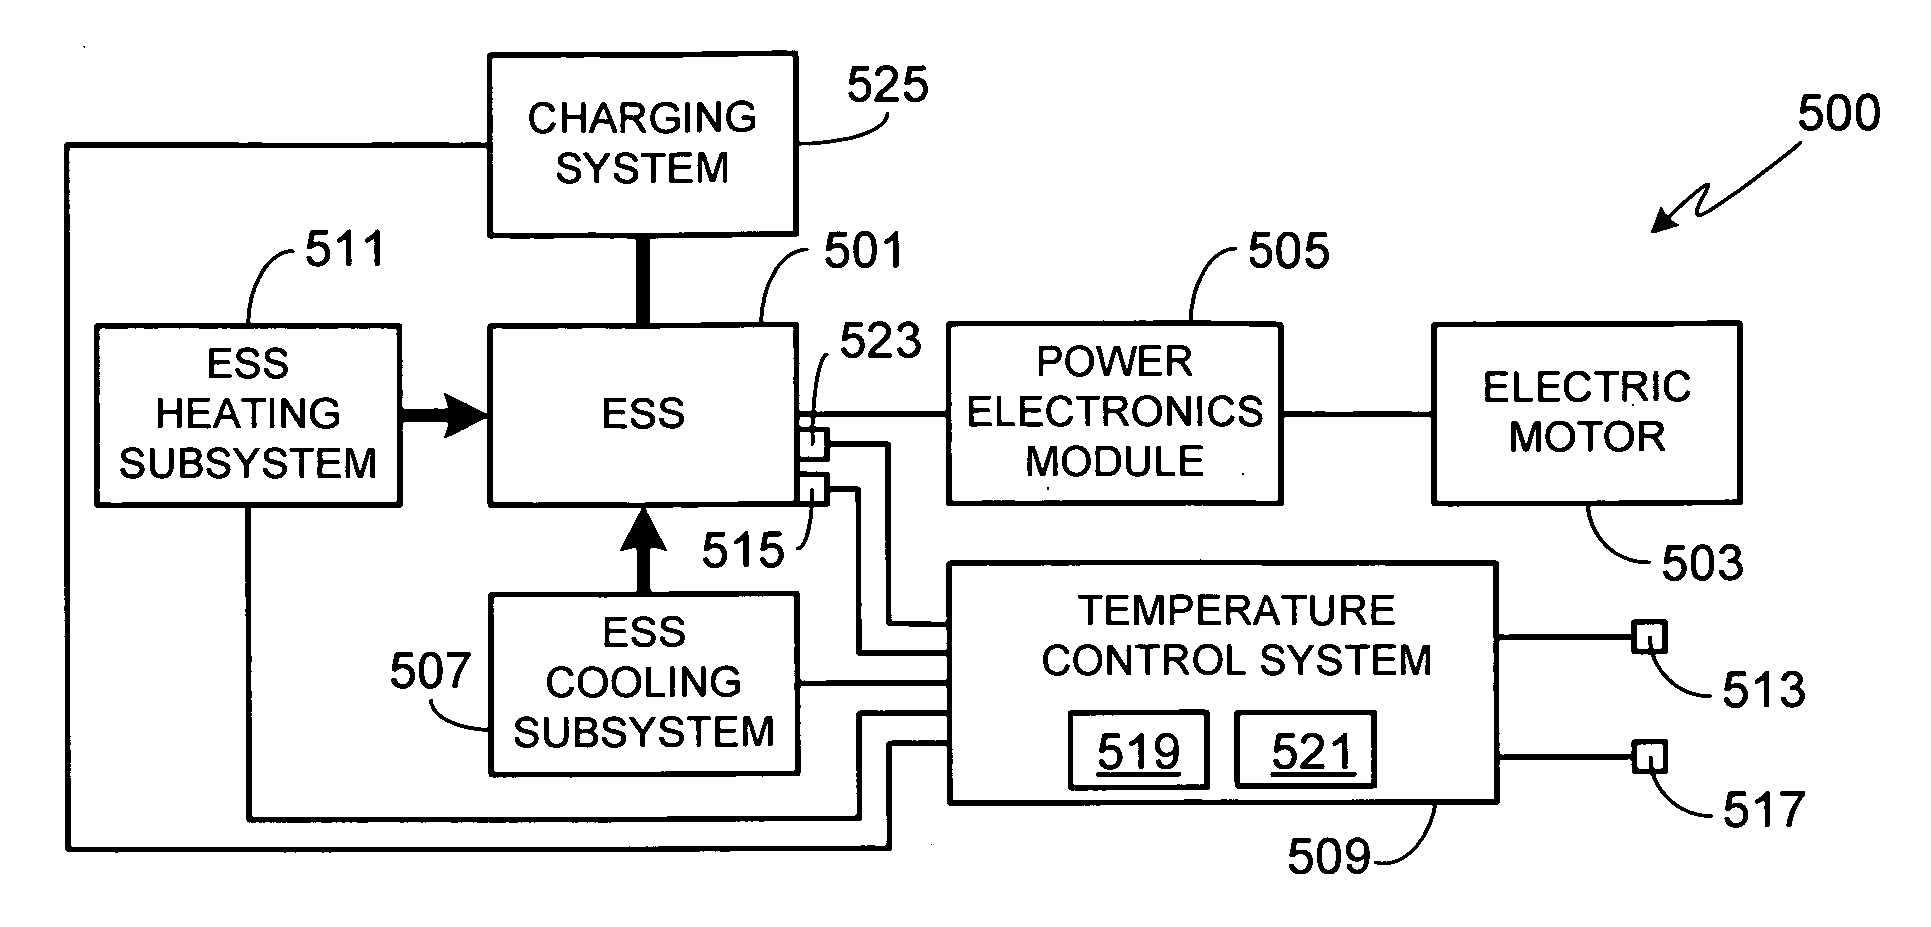 Battery pack temperature optimization control system